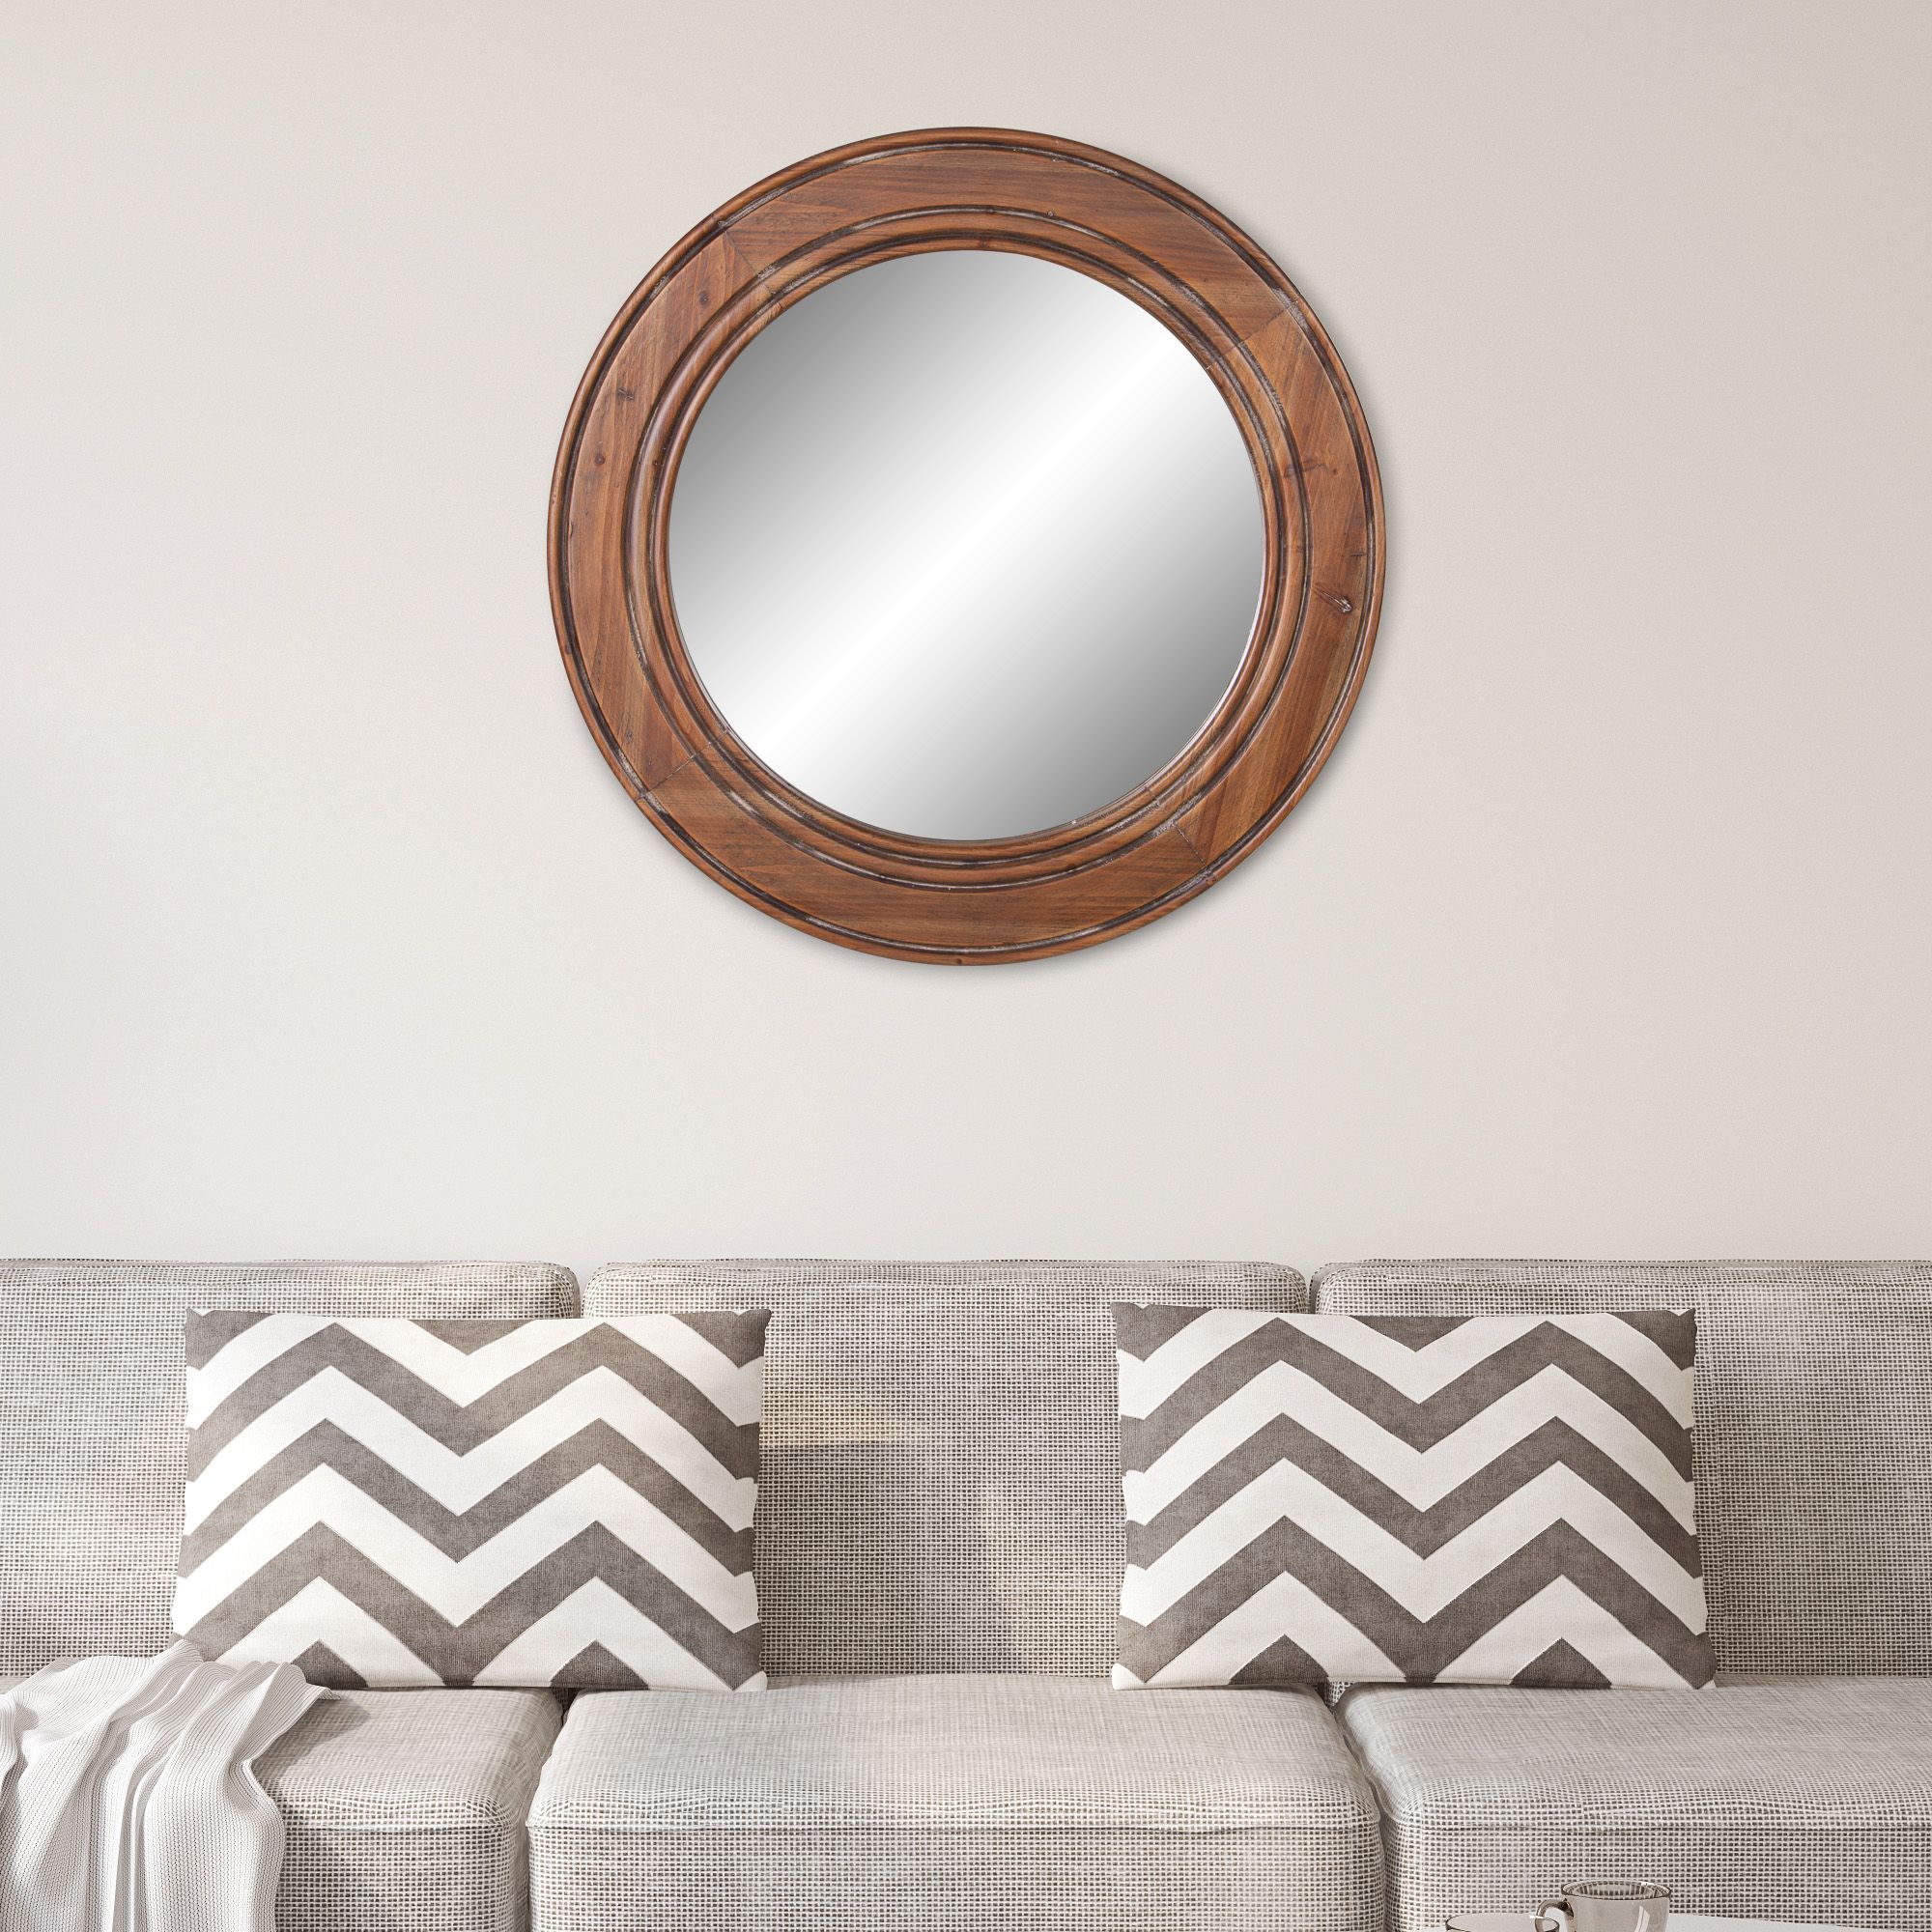 Reclaimed Wood Large Round Wall Accent Mirror 23"X23"Patton Wall Inside Wood Rounded Side Rectangular Wall Mirrors (View 3 of 15)